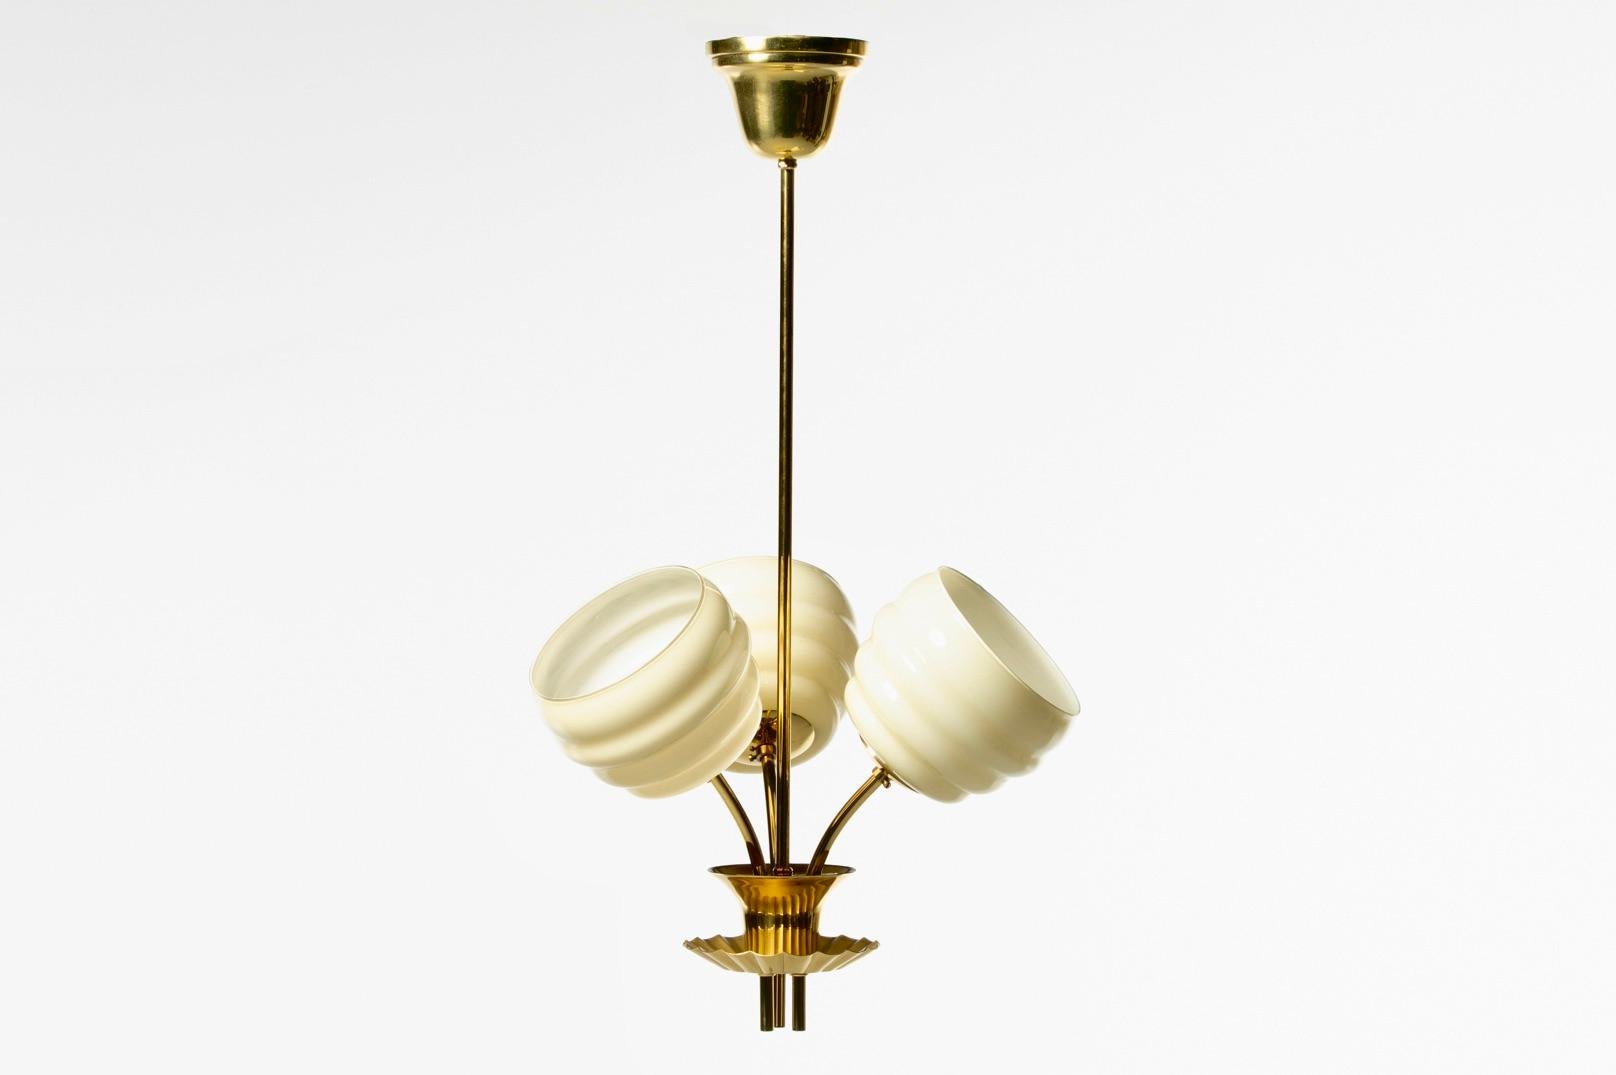 Hailing from Denmark and dating back to the 1930s is this glamorous Paavo Tynell style Art Deco brass and glass three light pendant. Beautiful and unique, the pendant features three channeled glass diffusers reminiscent of small bee hives. The